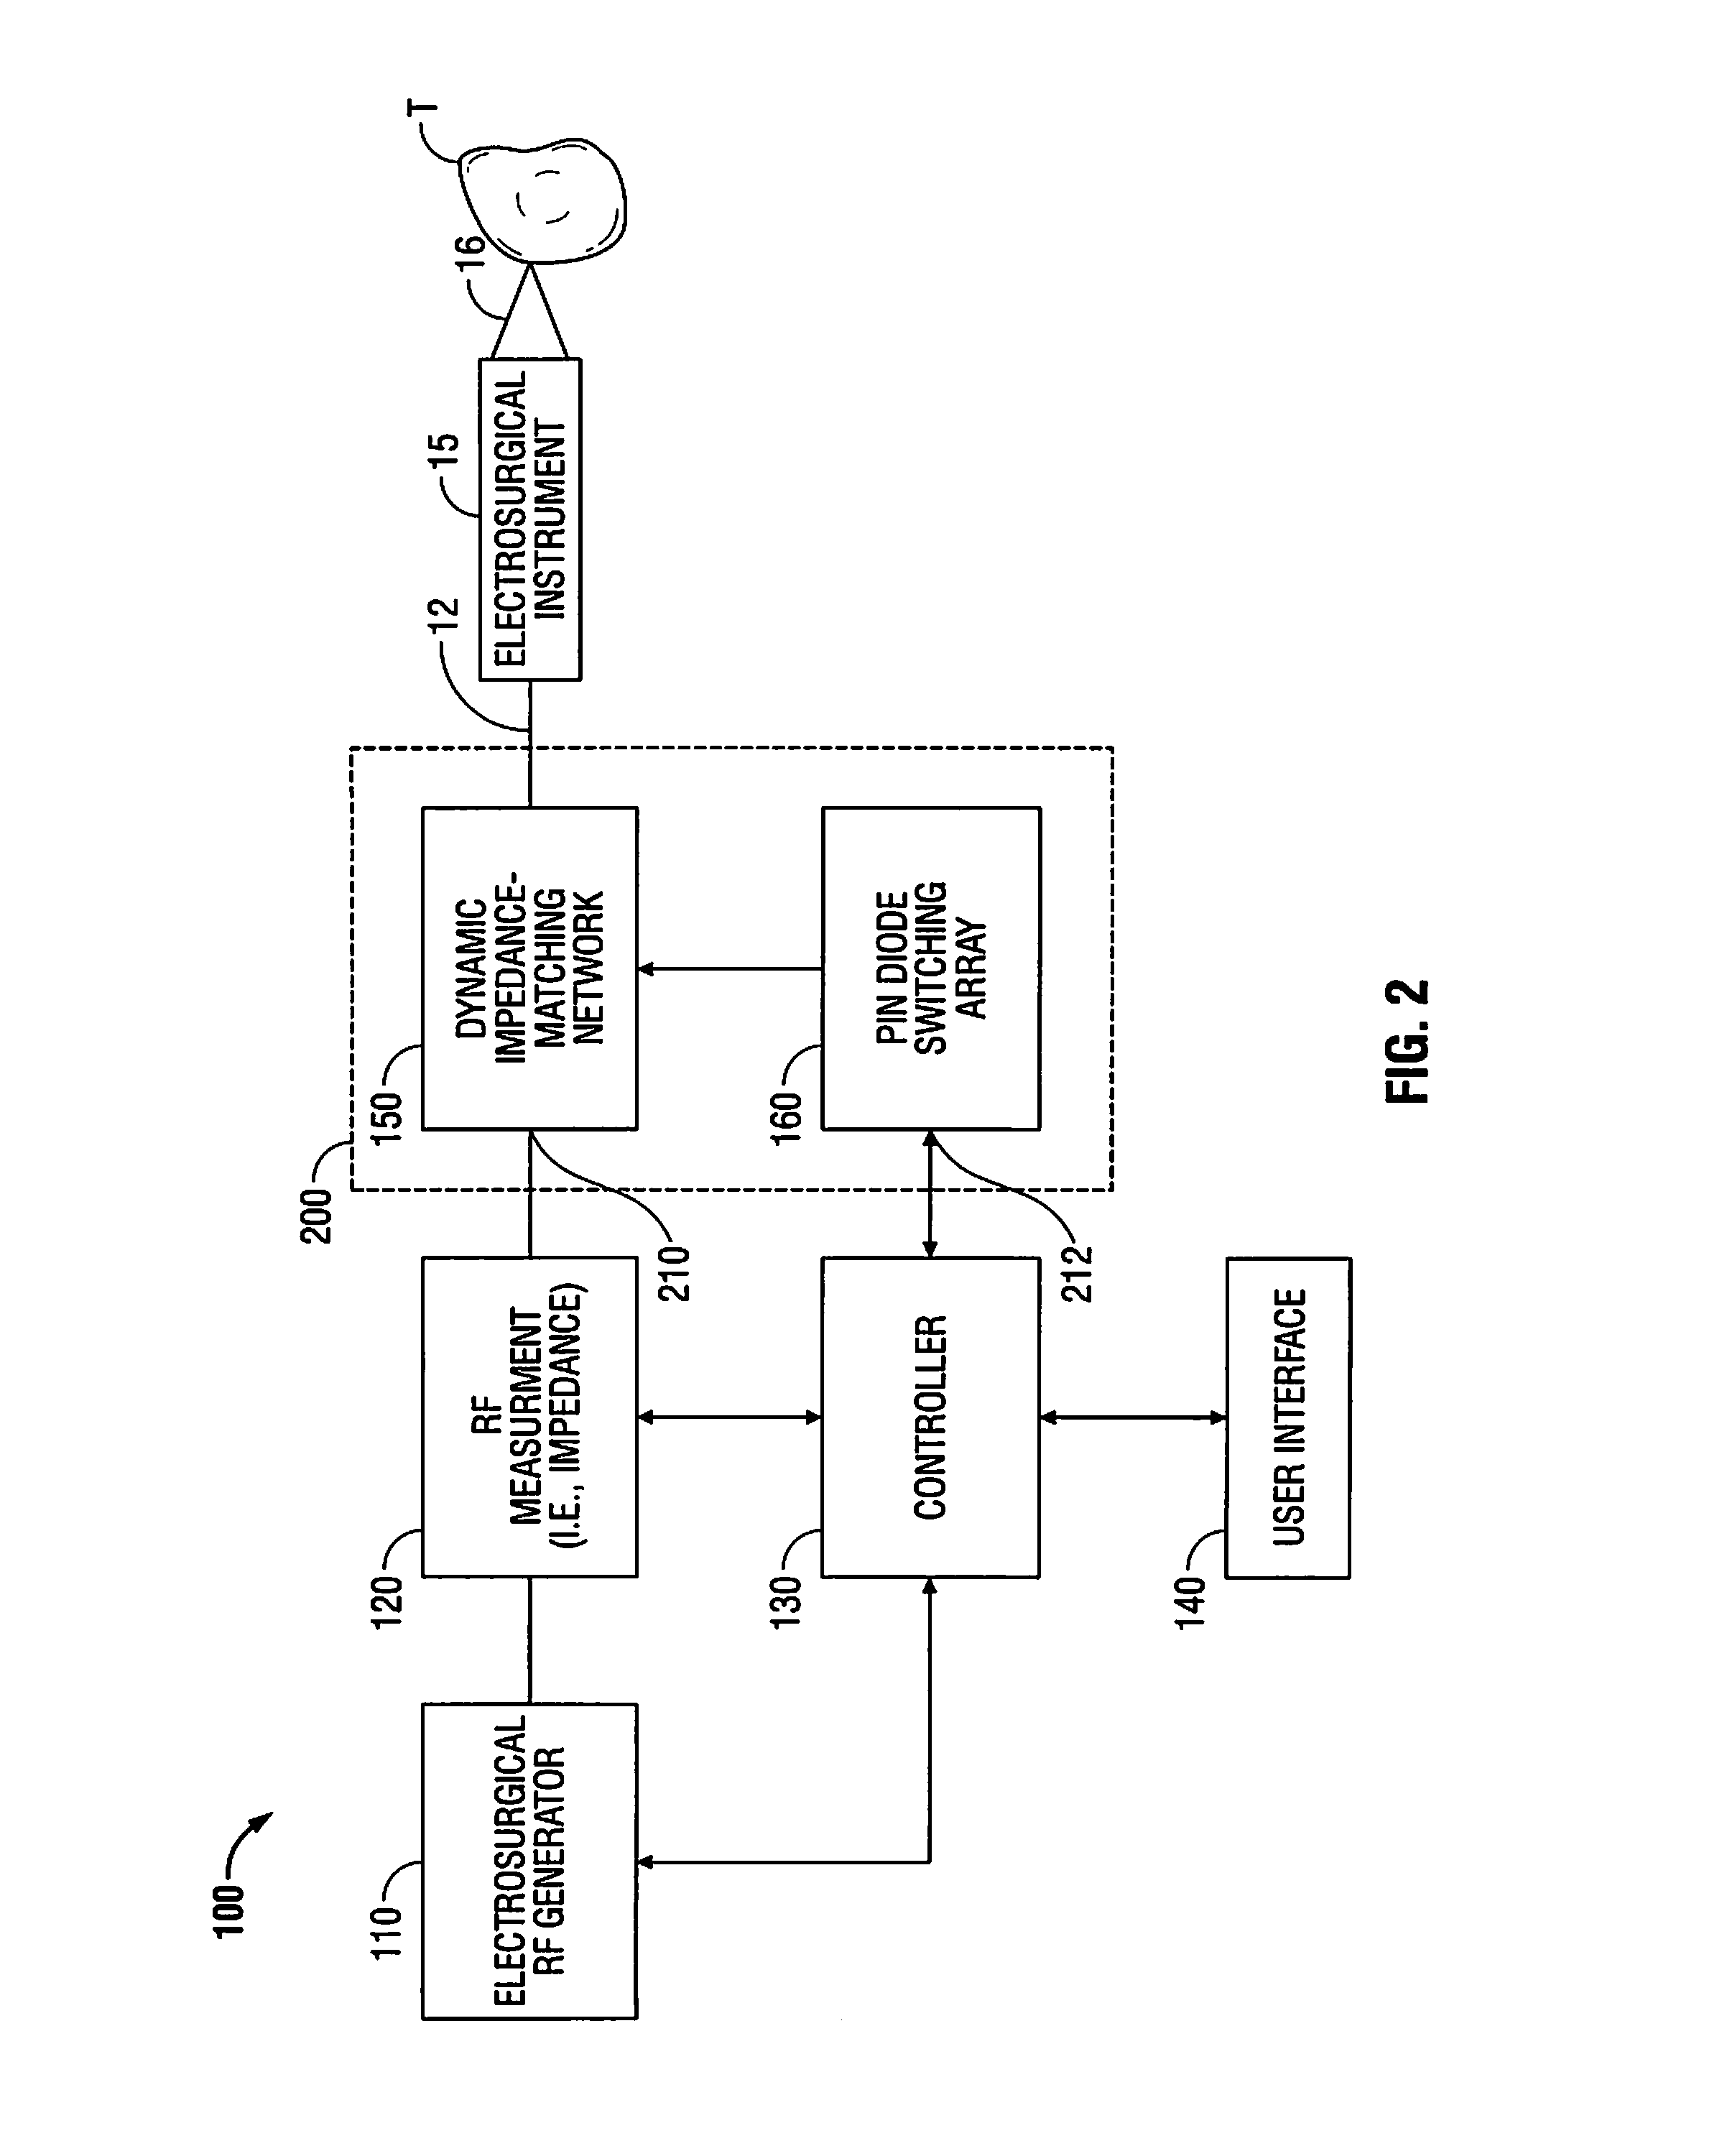 Microwave and RF ablation system and related method for dynamic impedance matching